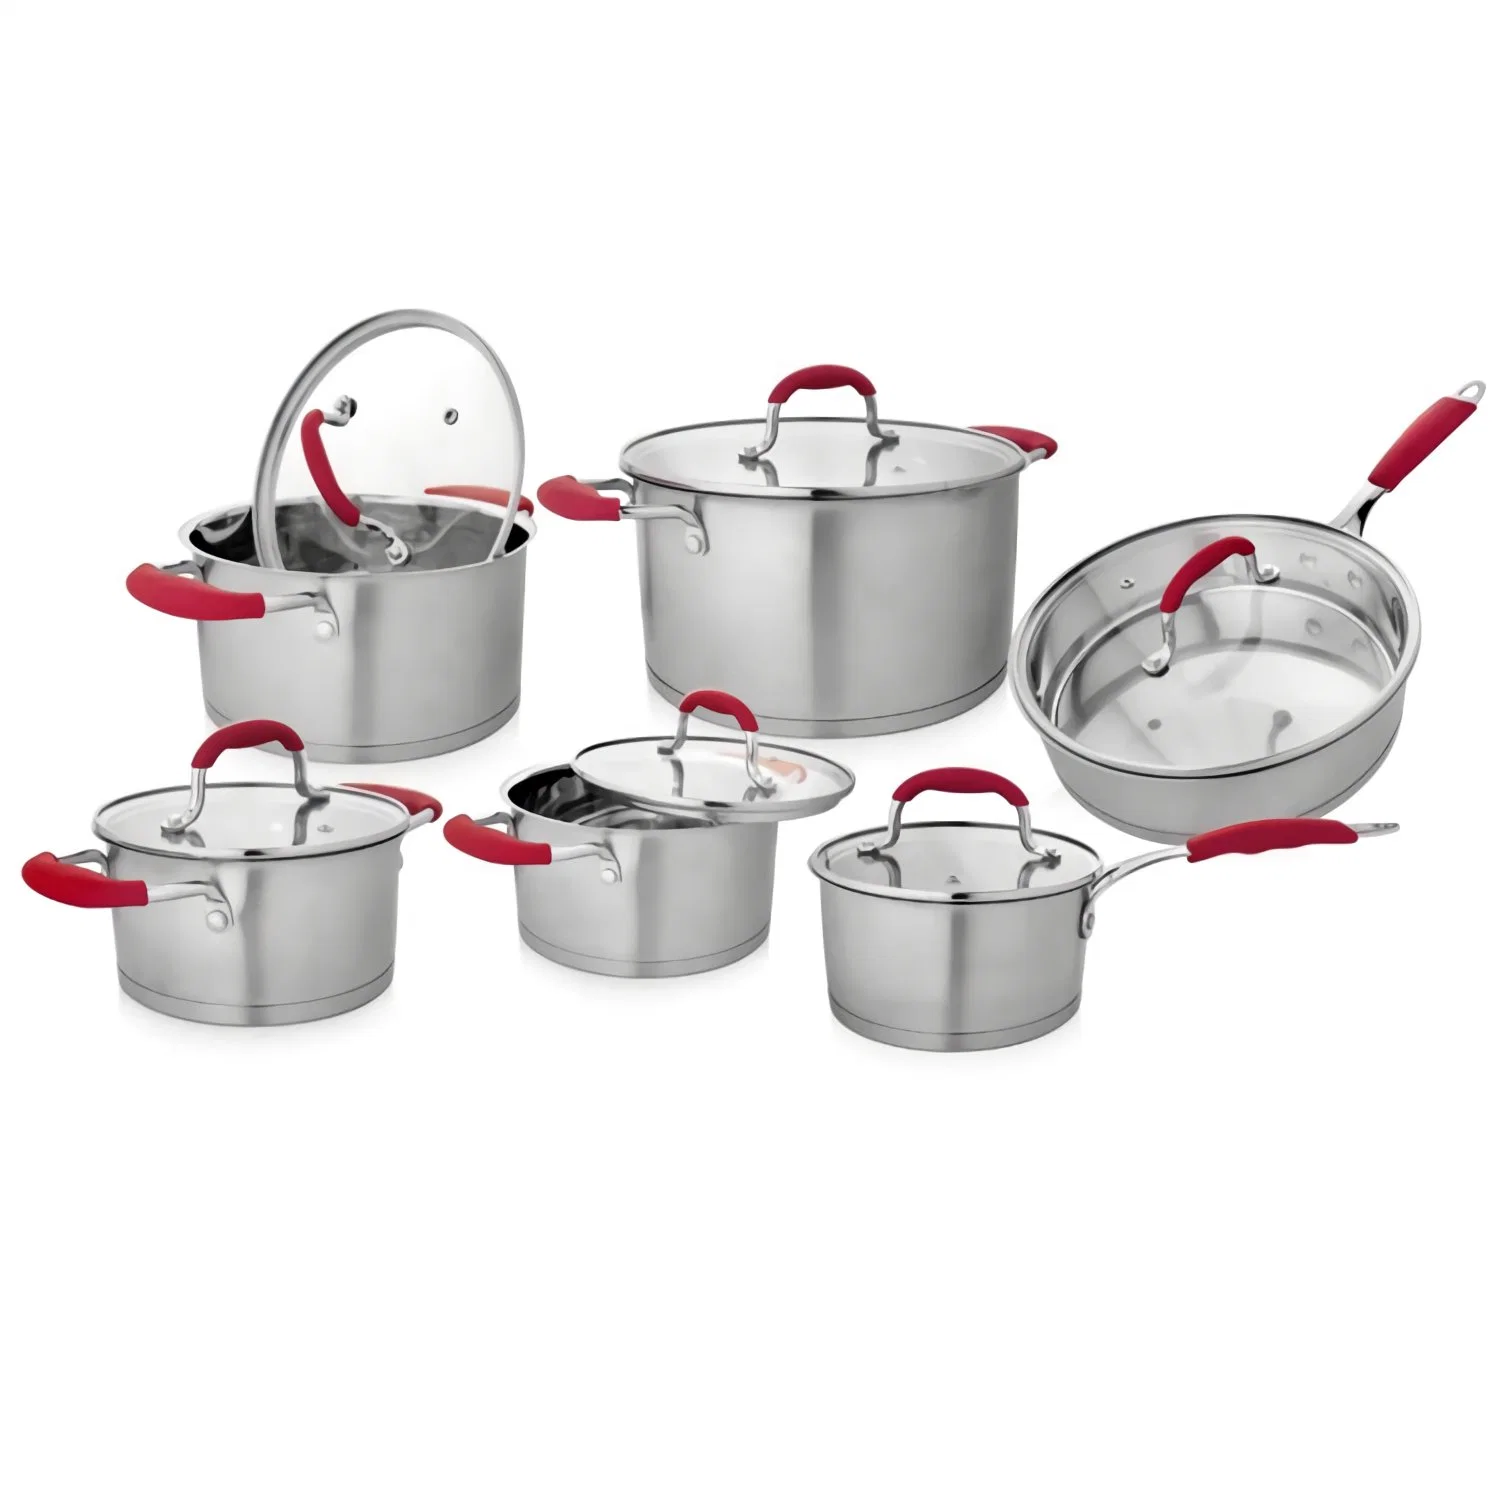 Stainless Steel Cookware Set 12PCS with Tempered Flat Glass Lid, Metal Soup Pots and Pans Induction Compatible, Non Stick Kitchenware for Any Cooktops